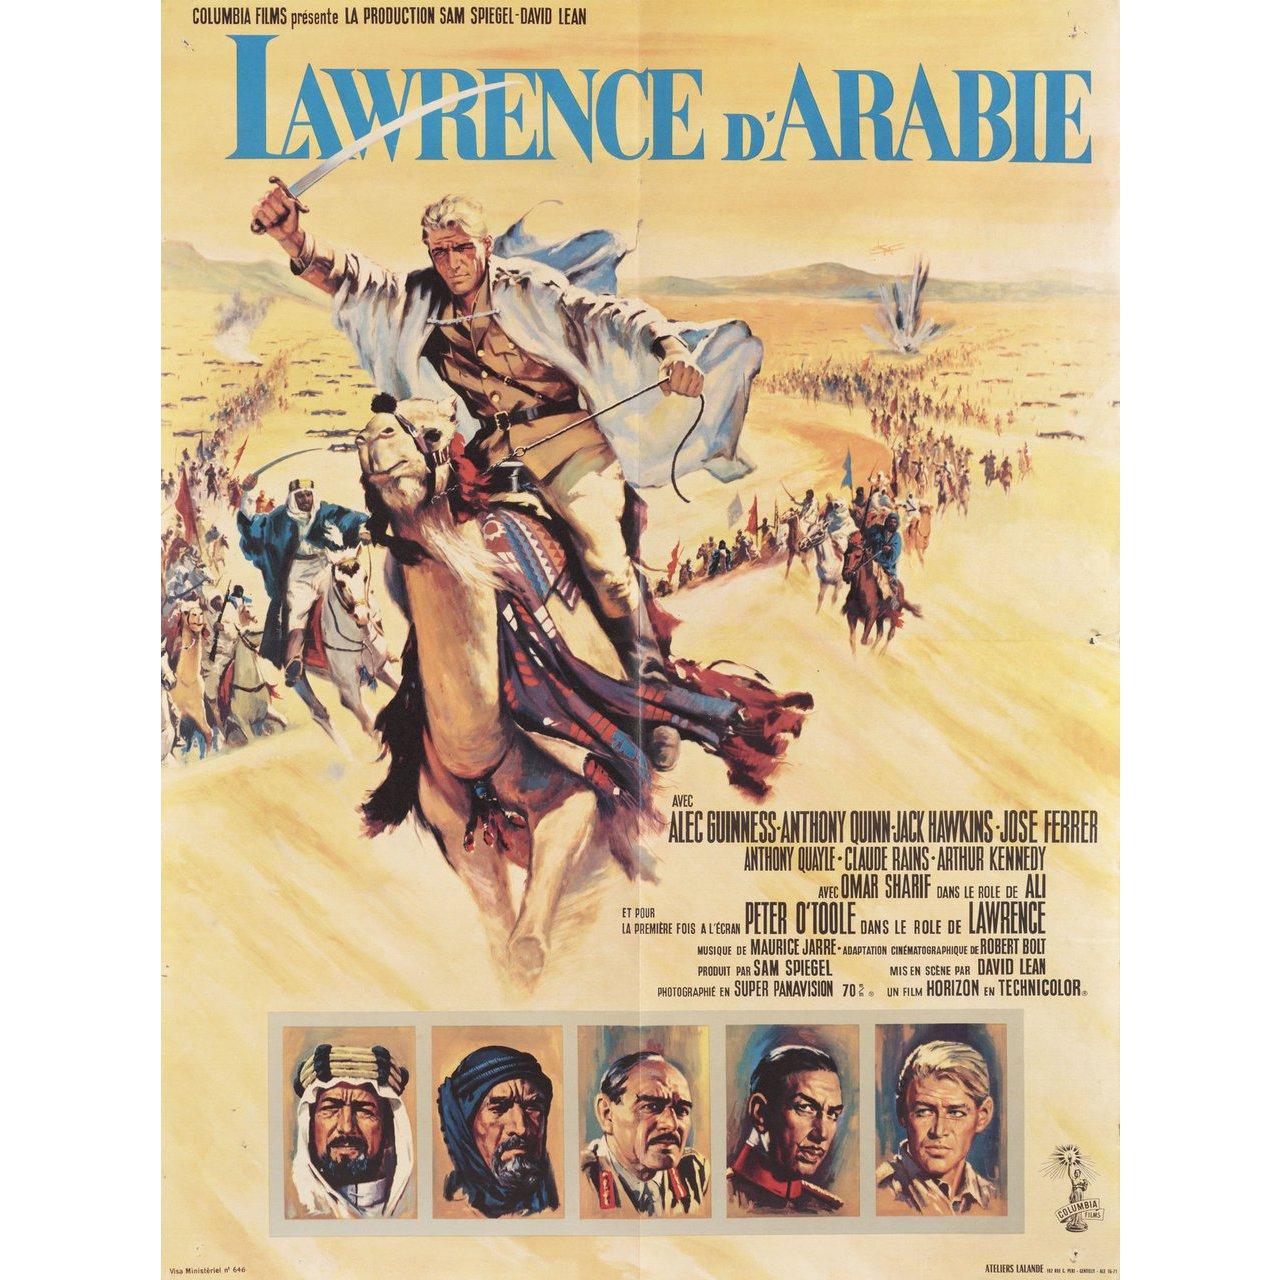 Original 1962 French moyenne poster for the film Lawrence of Arabia directed by David Lean with Peter O'Toole / Alec Guinness / Anthony Quinn / Jack Hawkins. Very Good condition, folded with pinholes & fold wear. Many original posters were issued